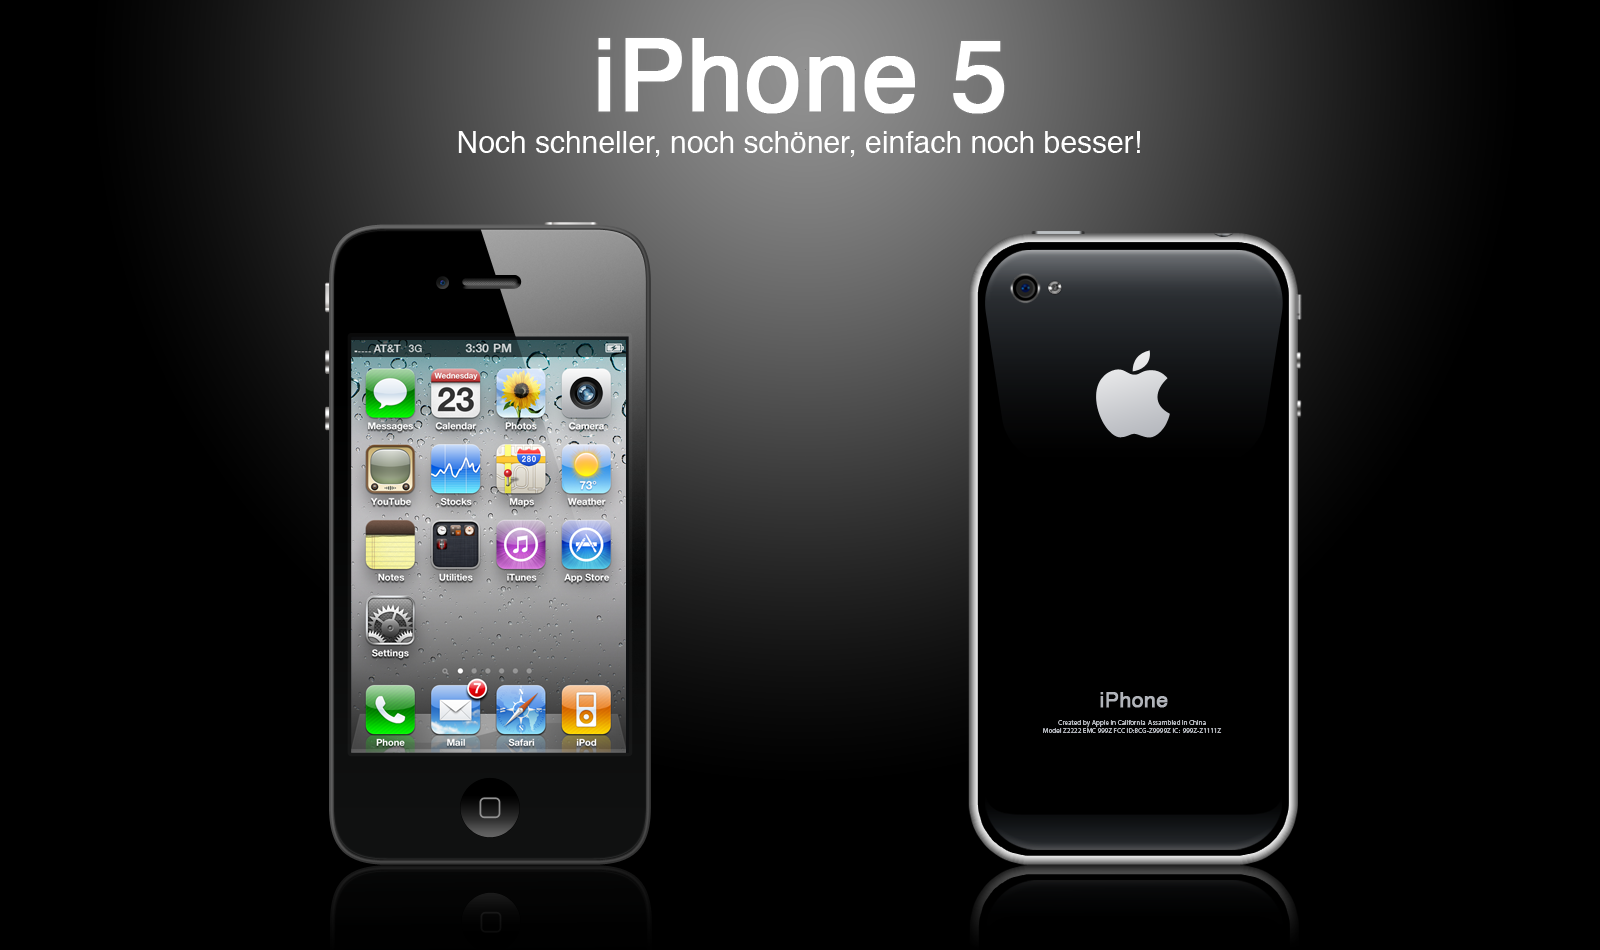 iphone 3gs animated wallpaper hd wallpaper free mobile wallpaper ...